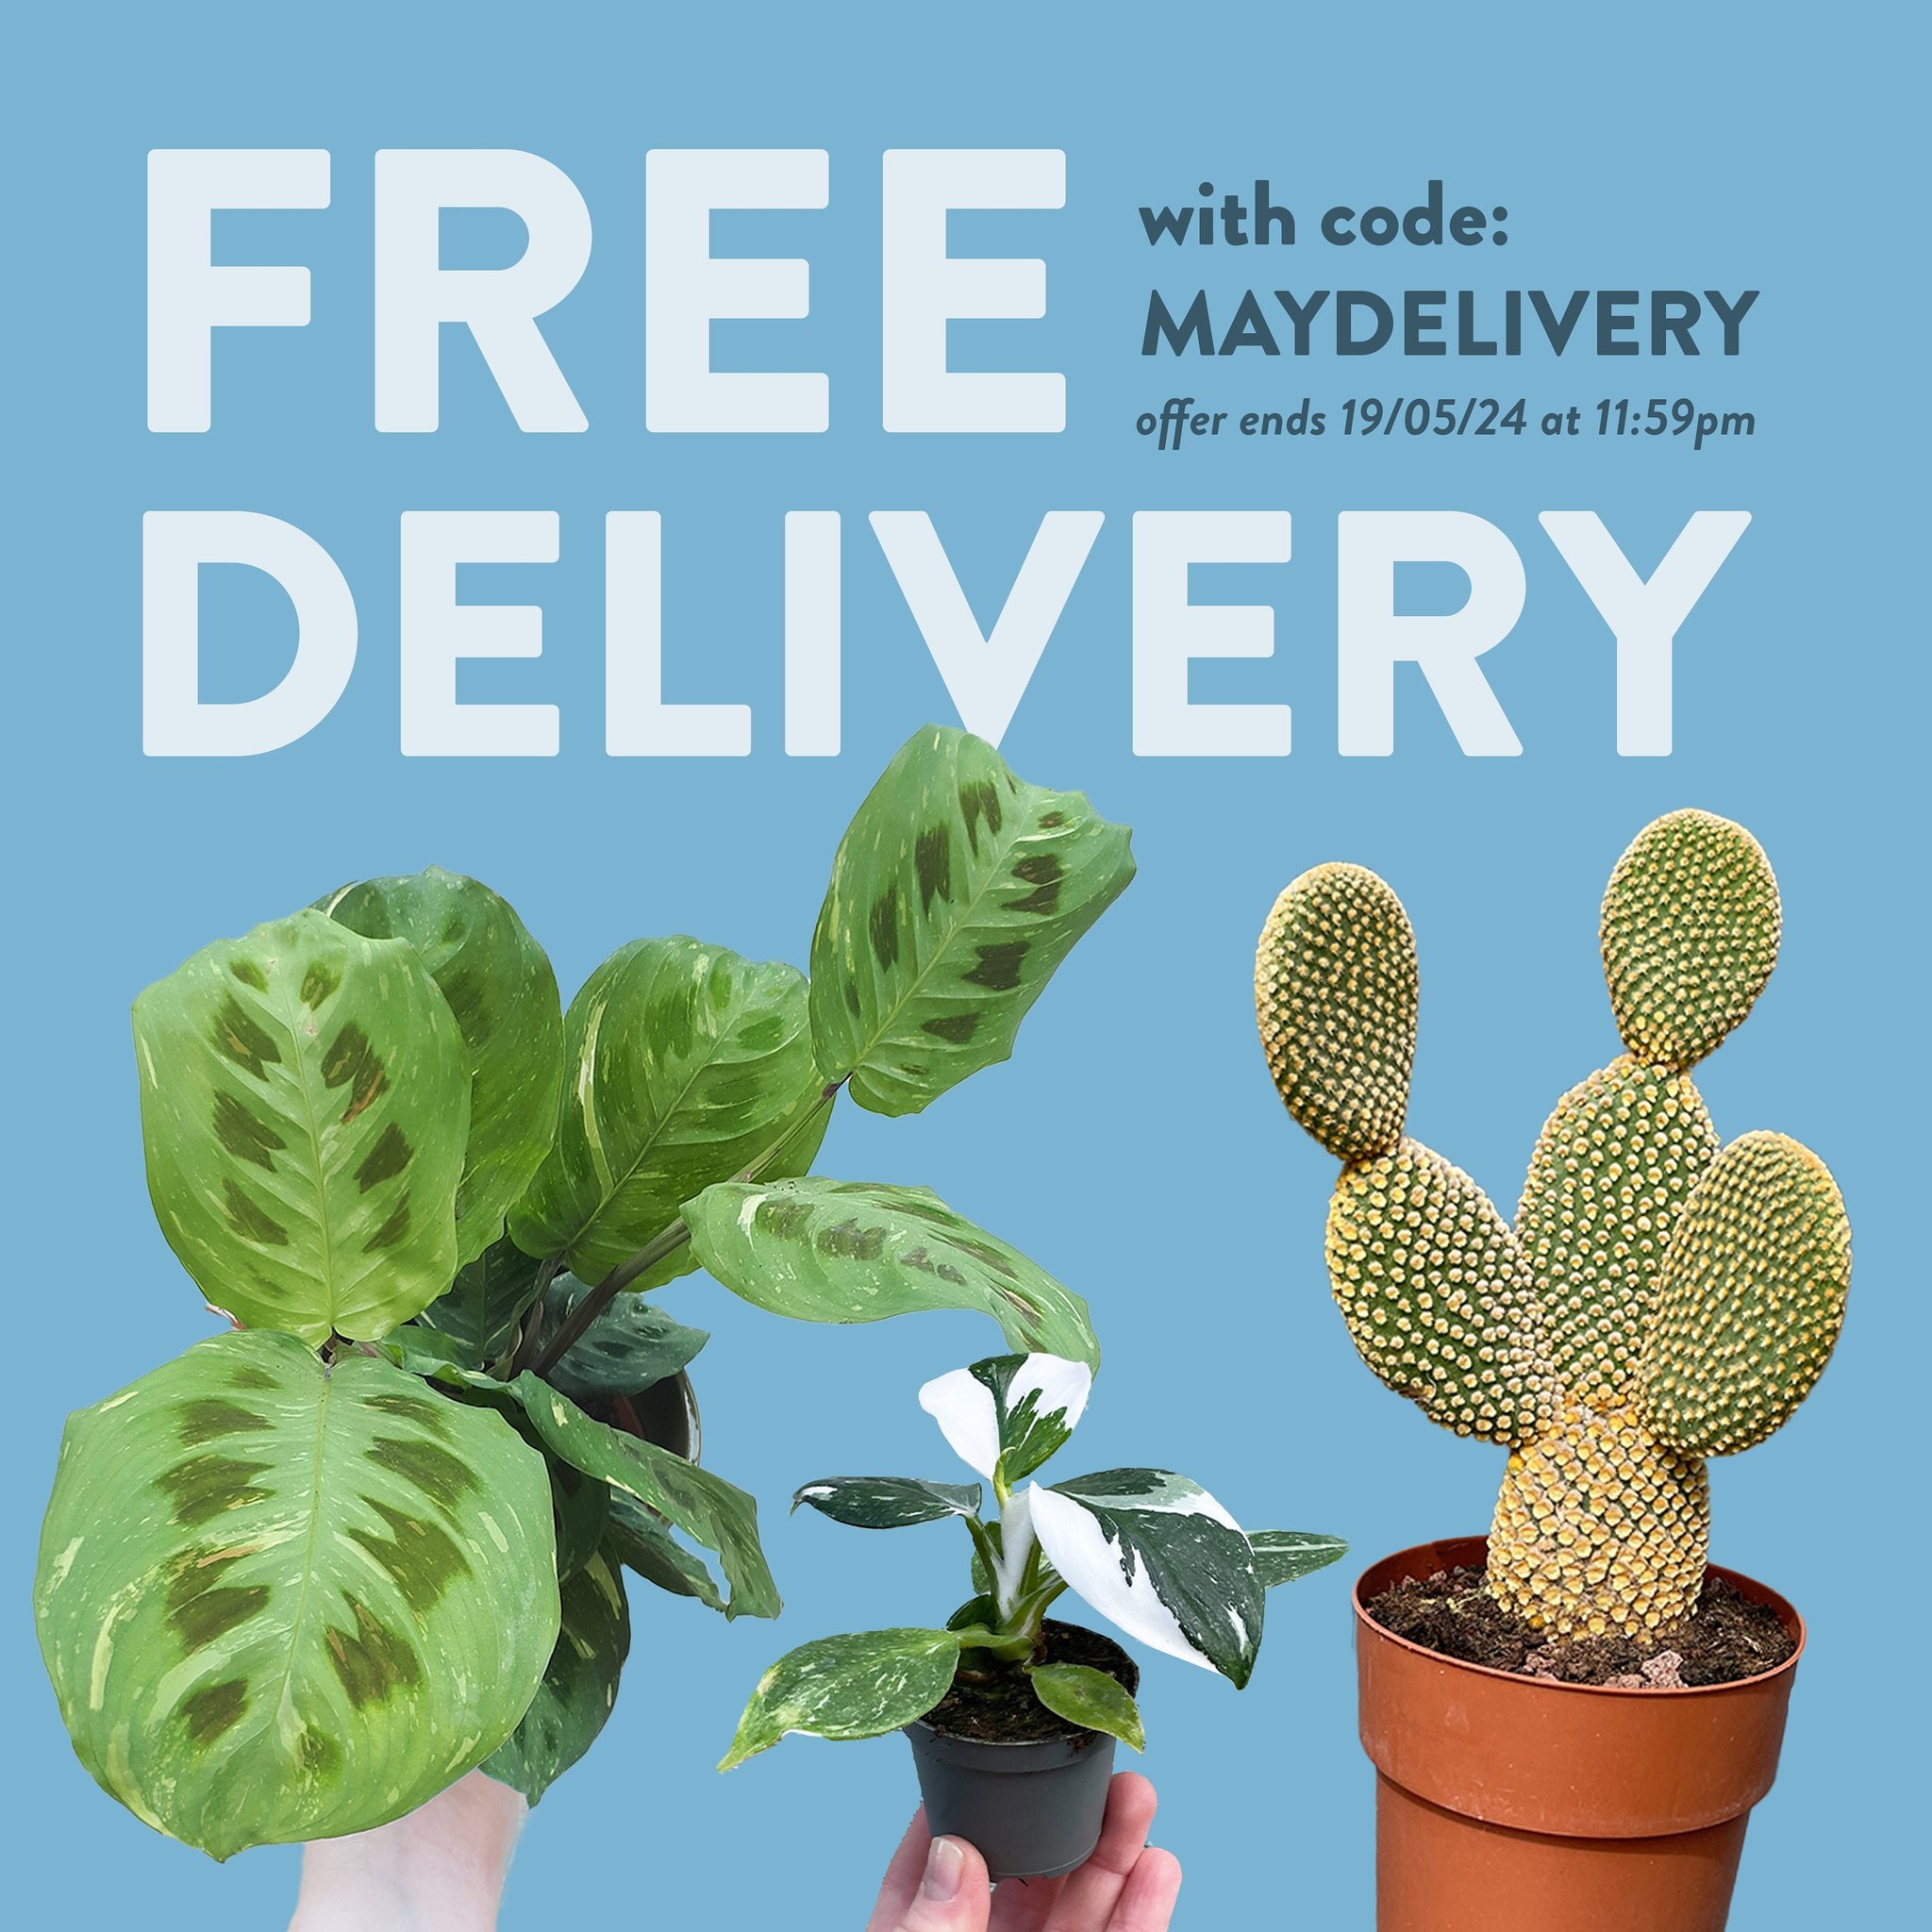 Maranta, Aeonium, Philodendron, Monstera, Calathea, Palms, Euphorbia and more, all hand-delivered to your door with FREE DELIVERY this week. 

Use code: MAYDELIVERY at checkout and get your order delivered for FREE. We deliver every Wednesday &amp; F